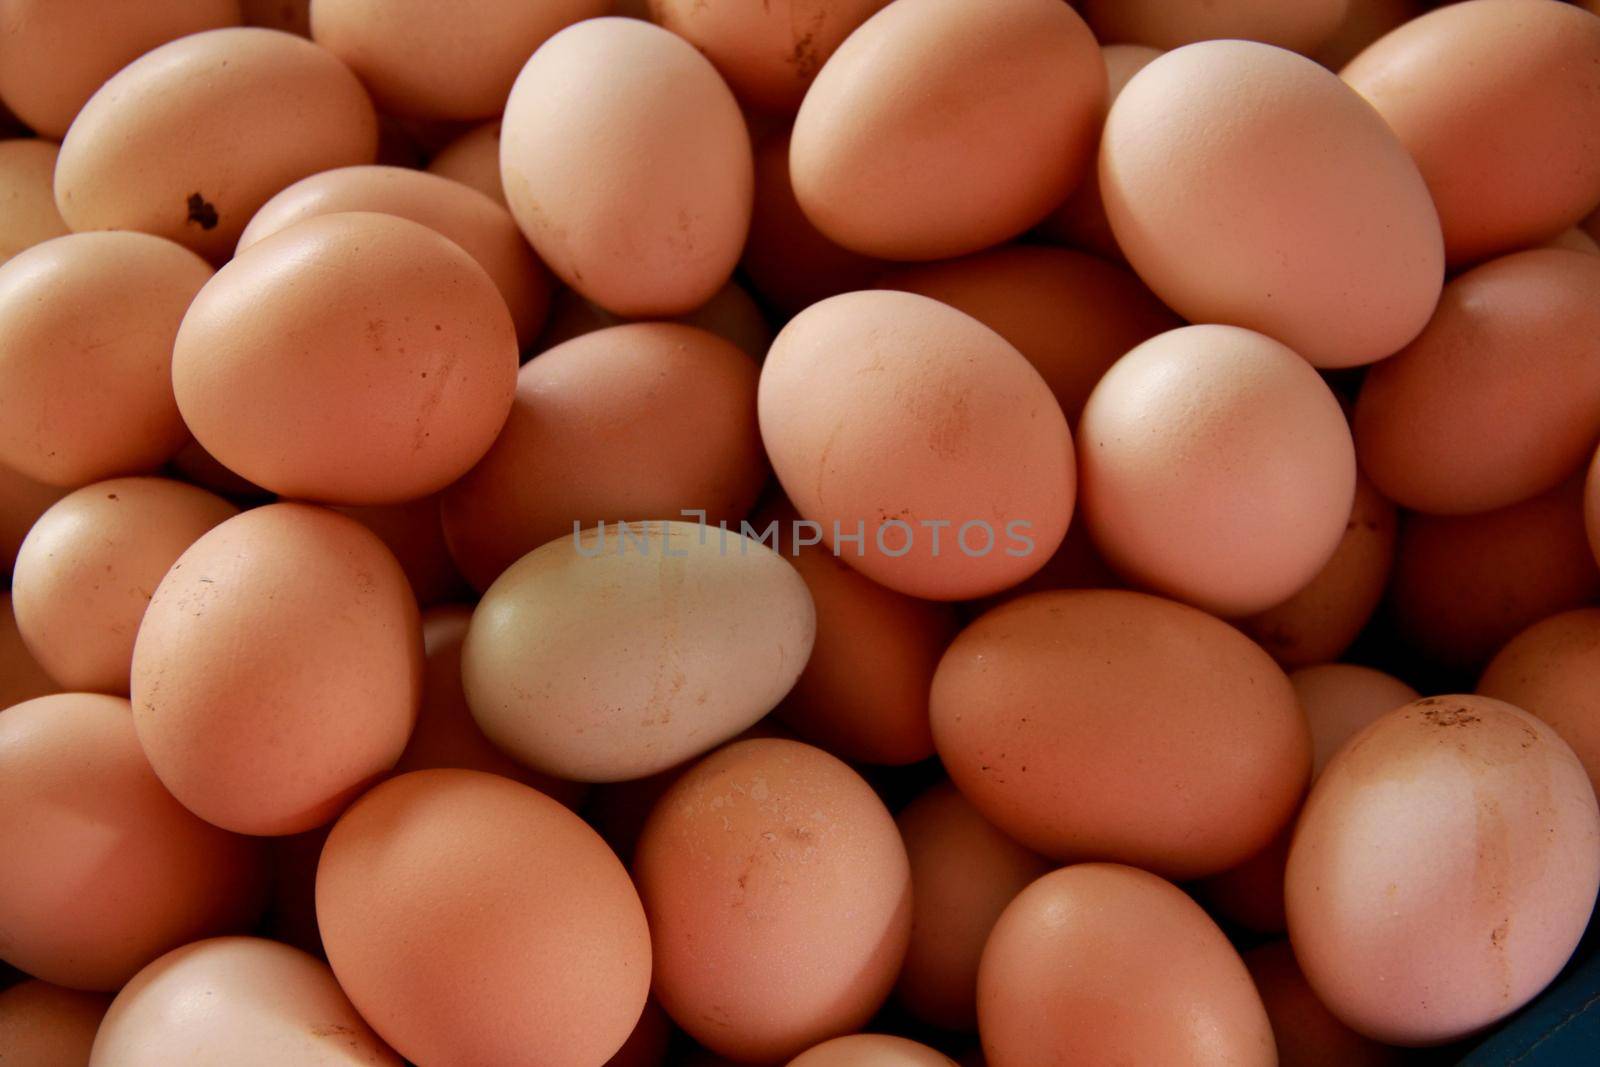 conde, bahia / brazil - september 17, 2012: chicken eggs for sale at an open market in the city of Conde.
